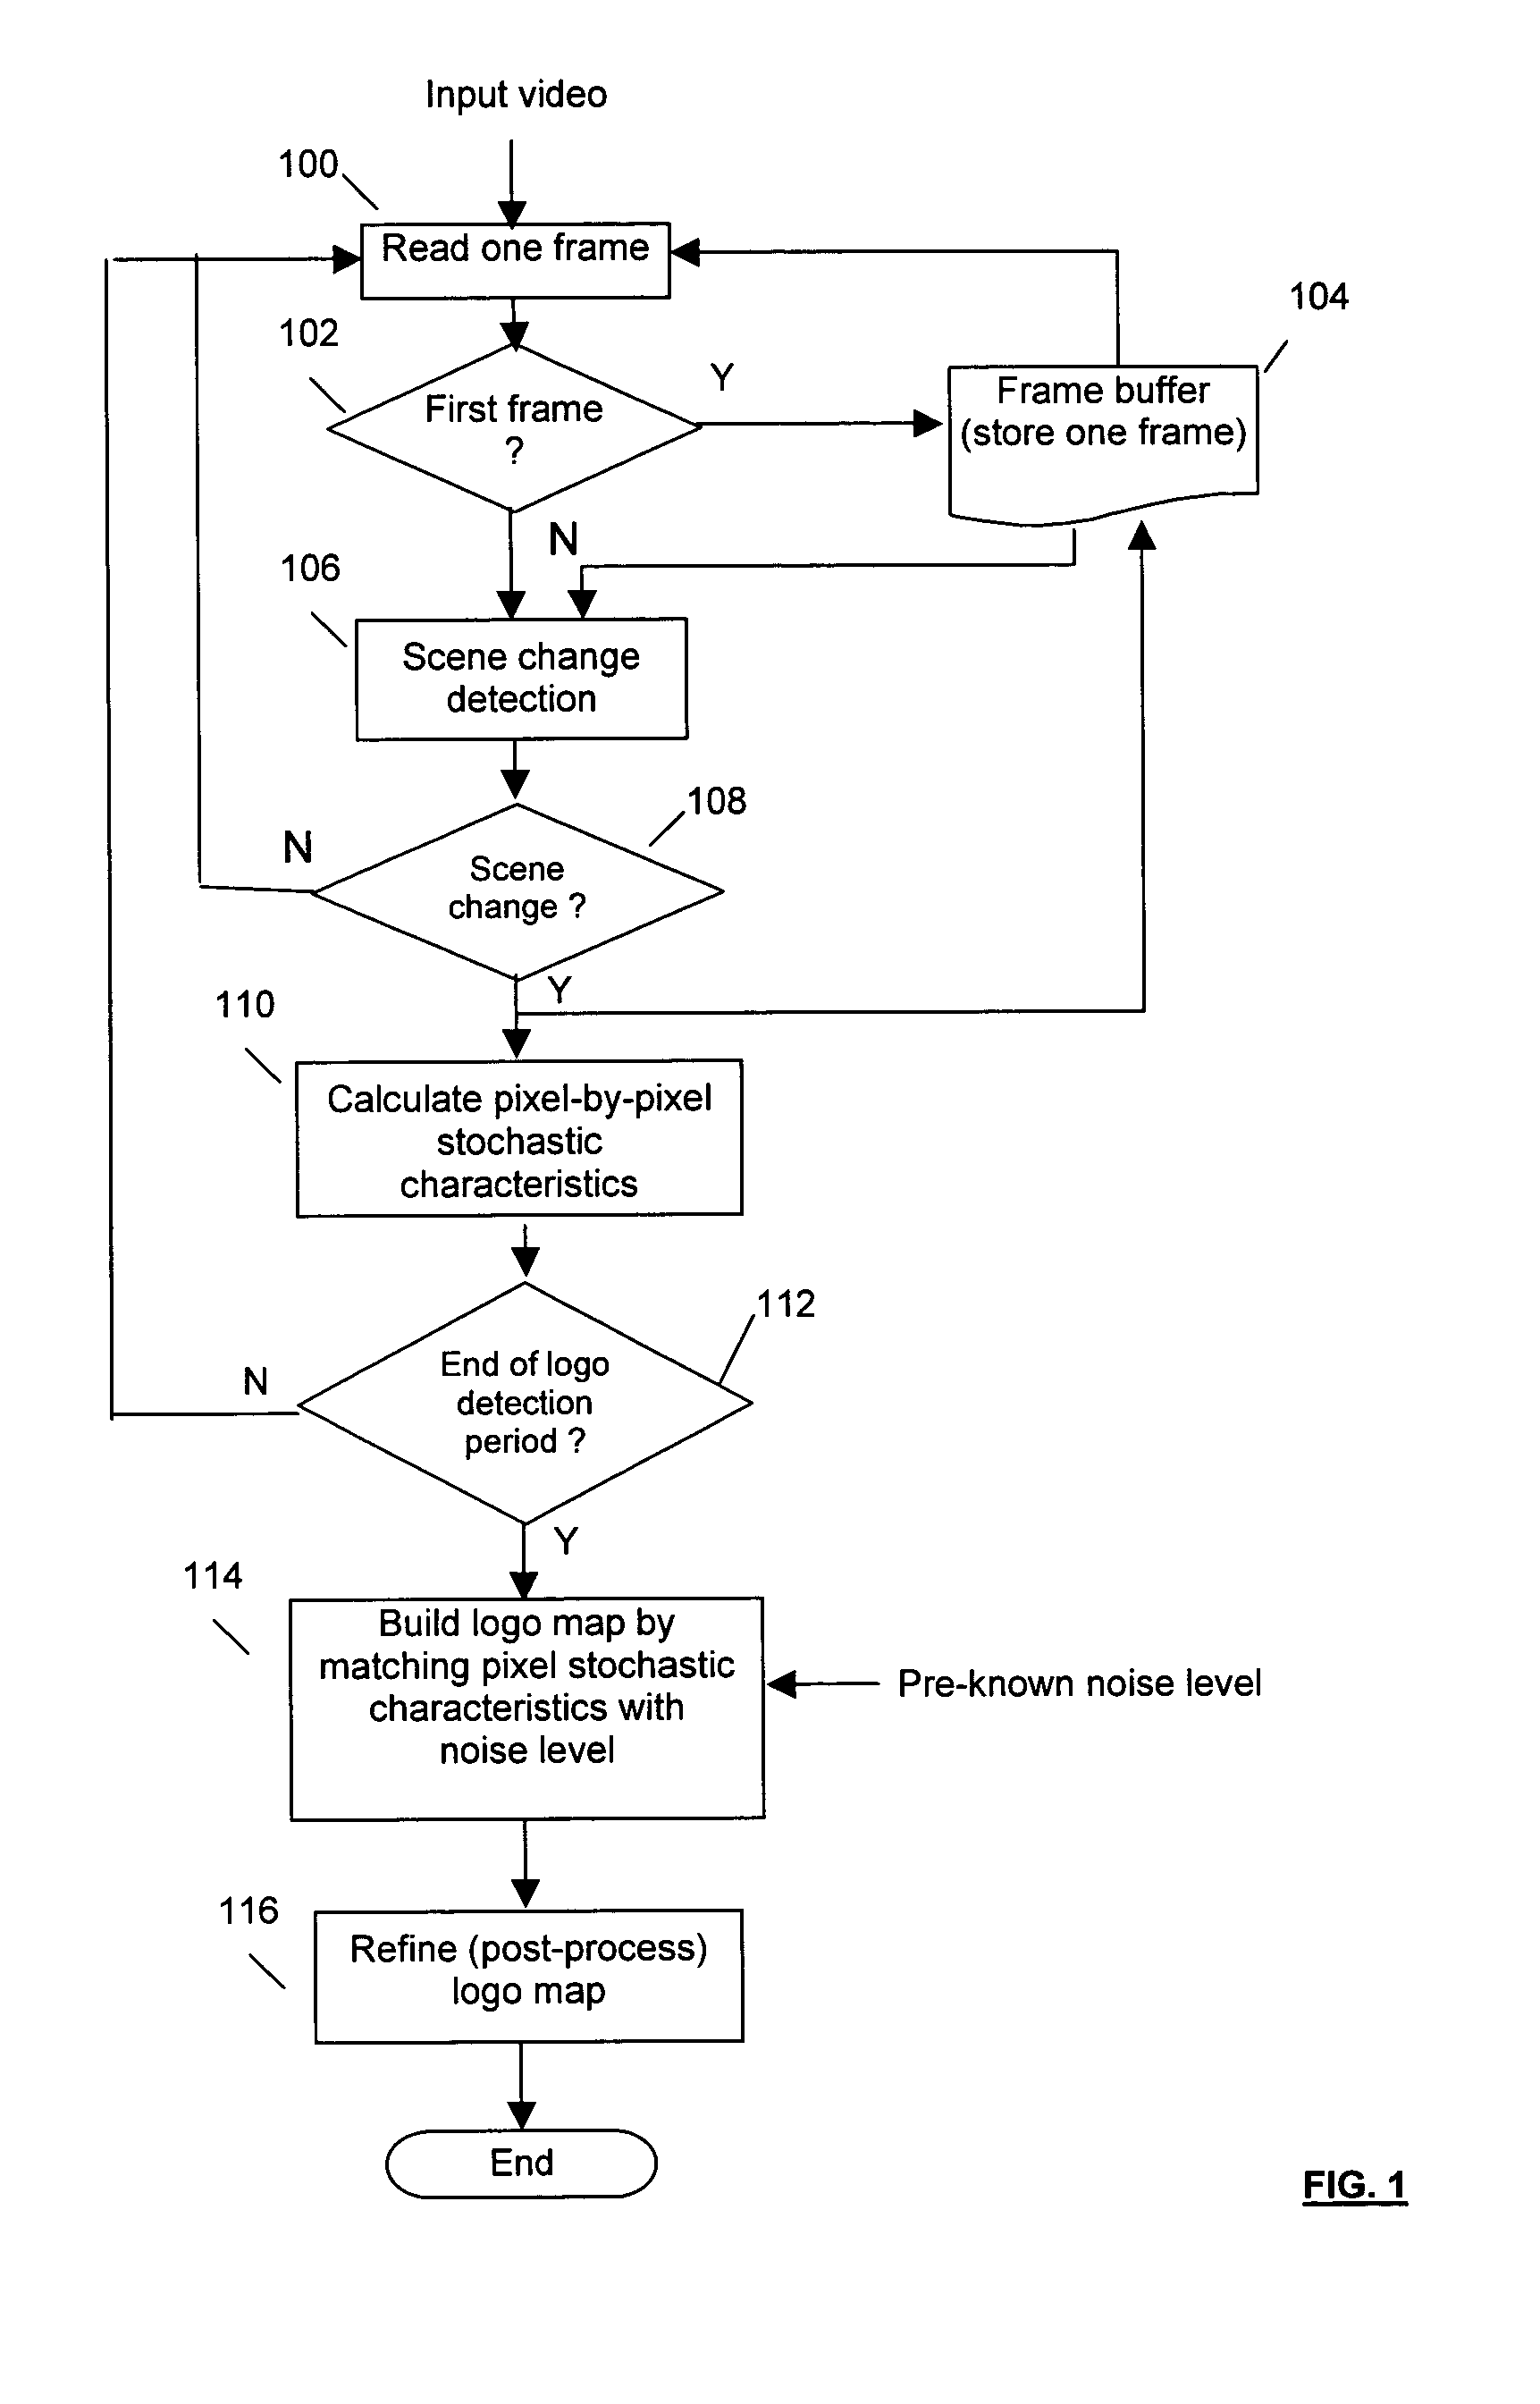 Apparatus and method for detecting opaque logos within digital video signals